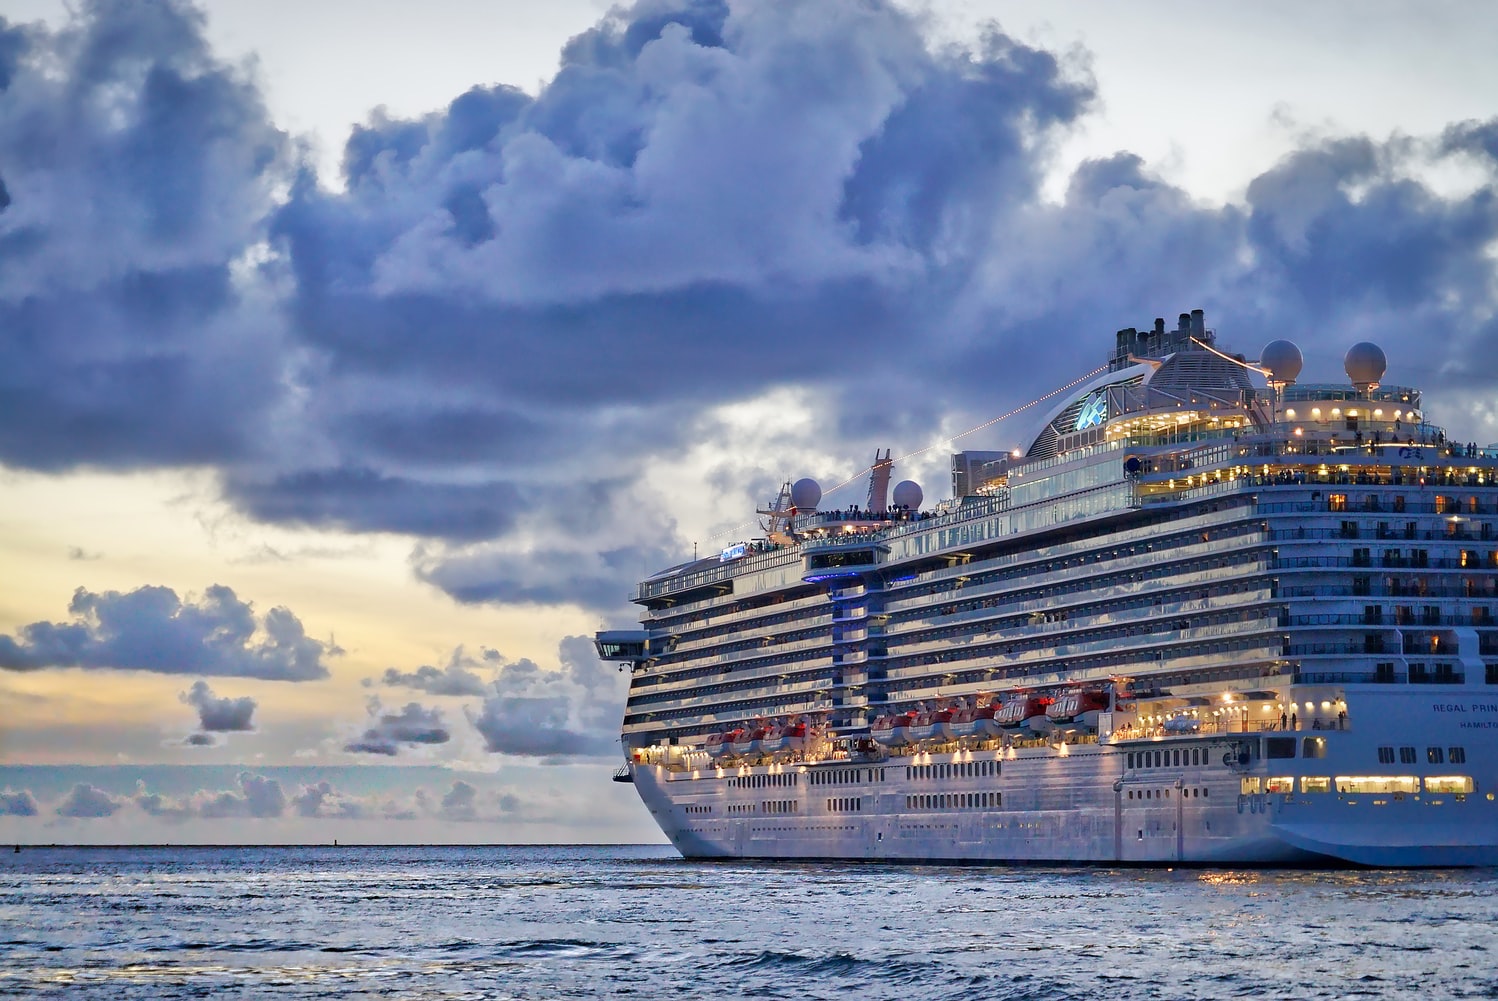 A picture of a cruise ship in the ocean at dusk. The lights on the ship are illuminated and the sky is cloudy.